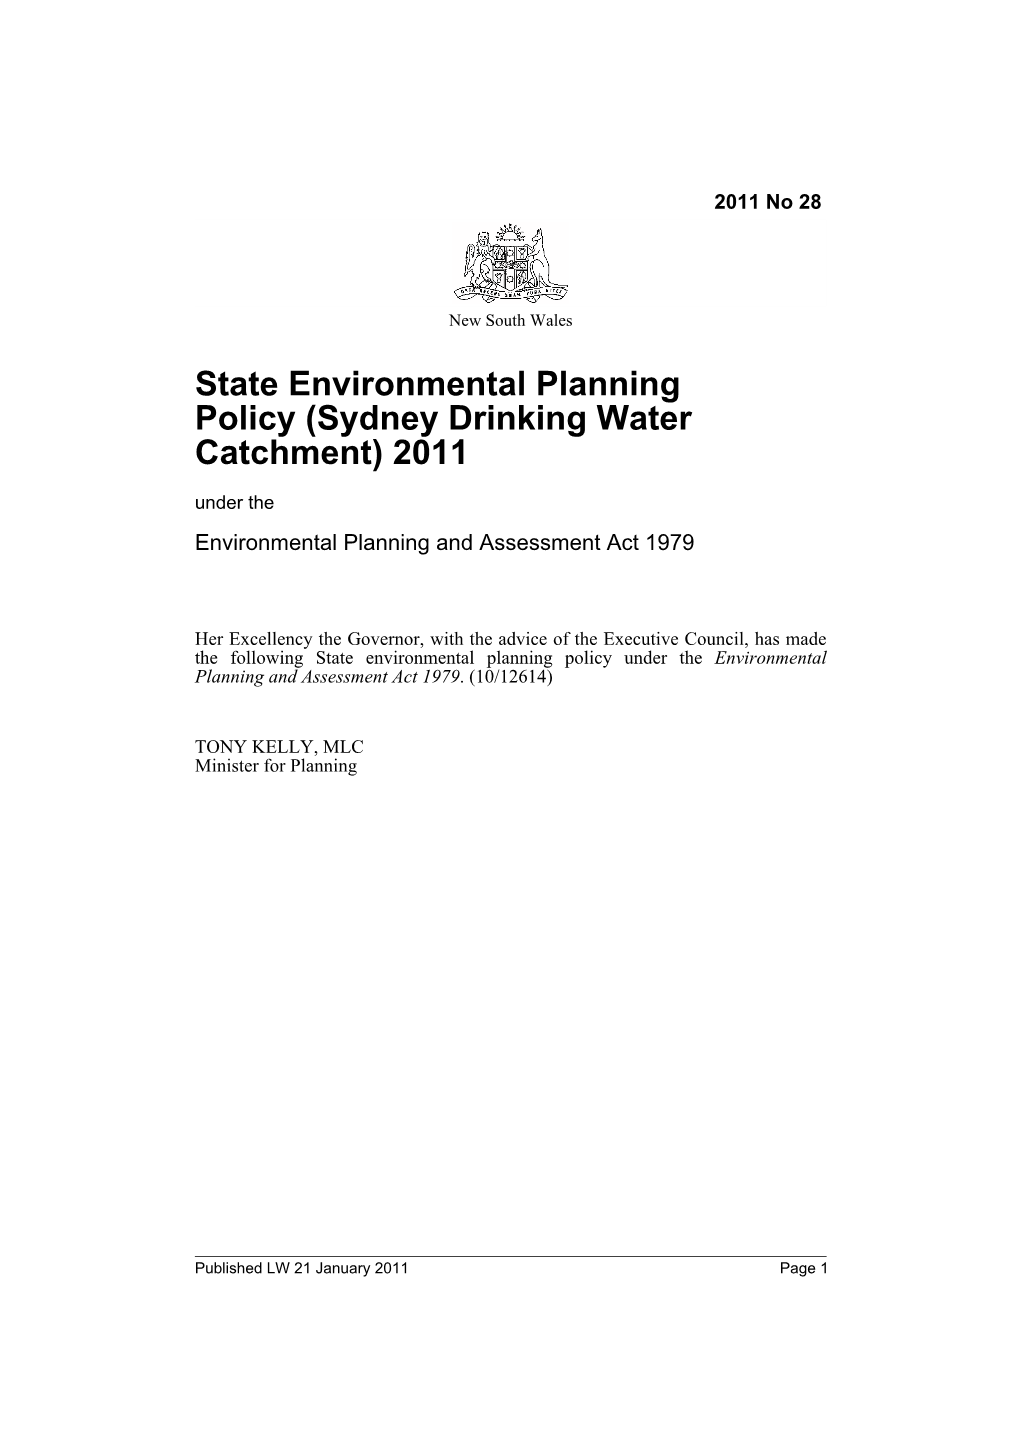 (Sydney Drinking Water Catchment) 2011 Under the Environmental Planning and Assessment Act 1979